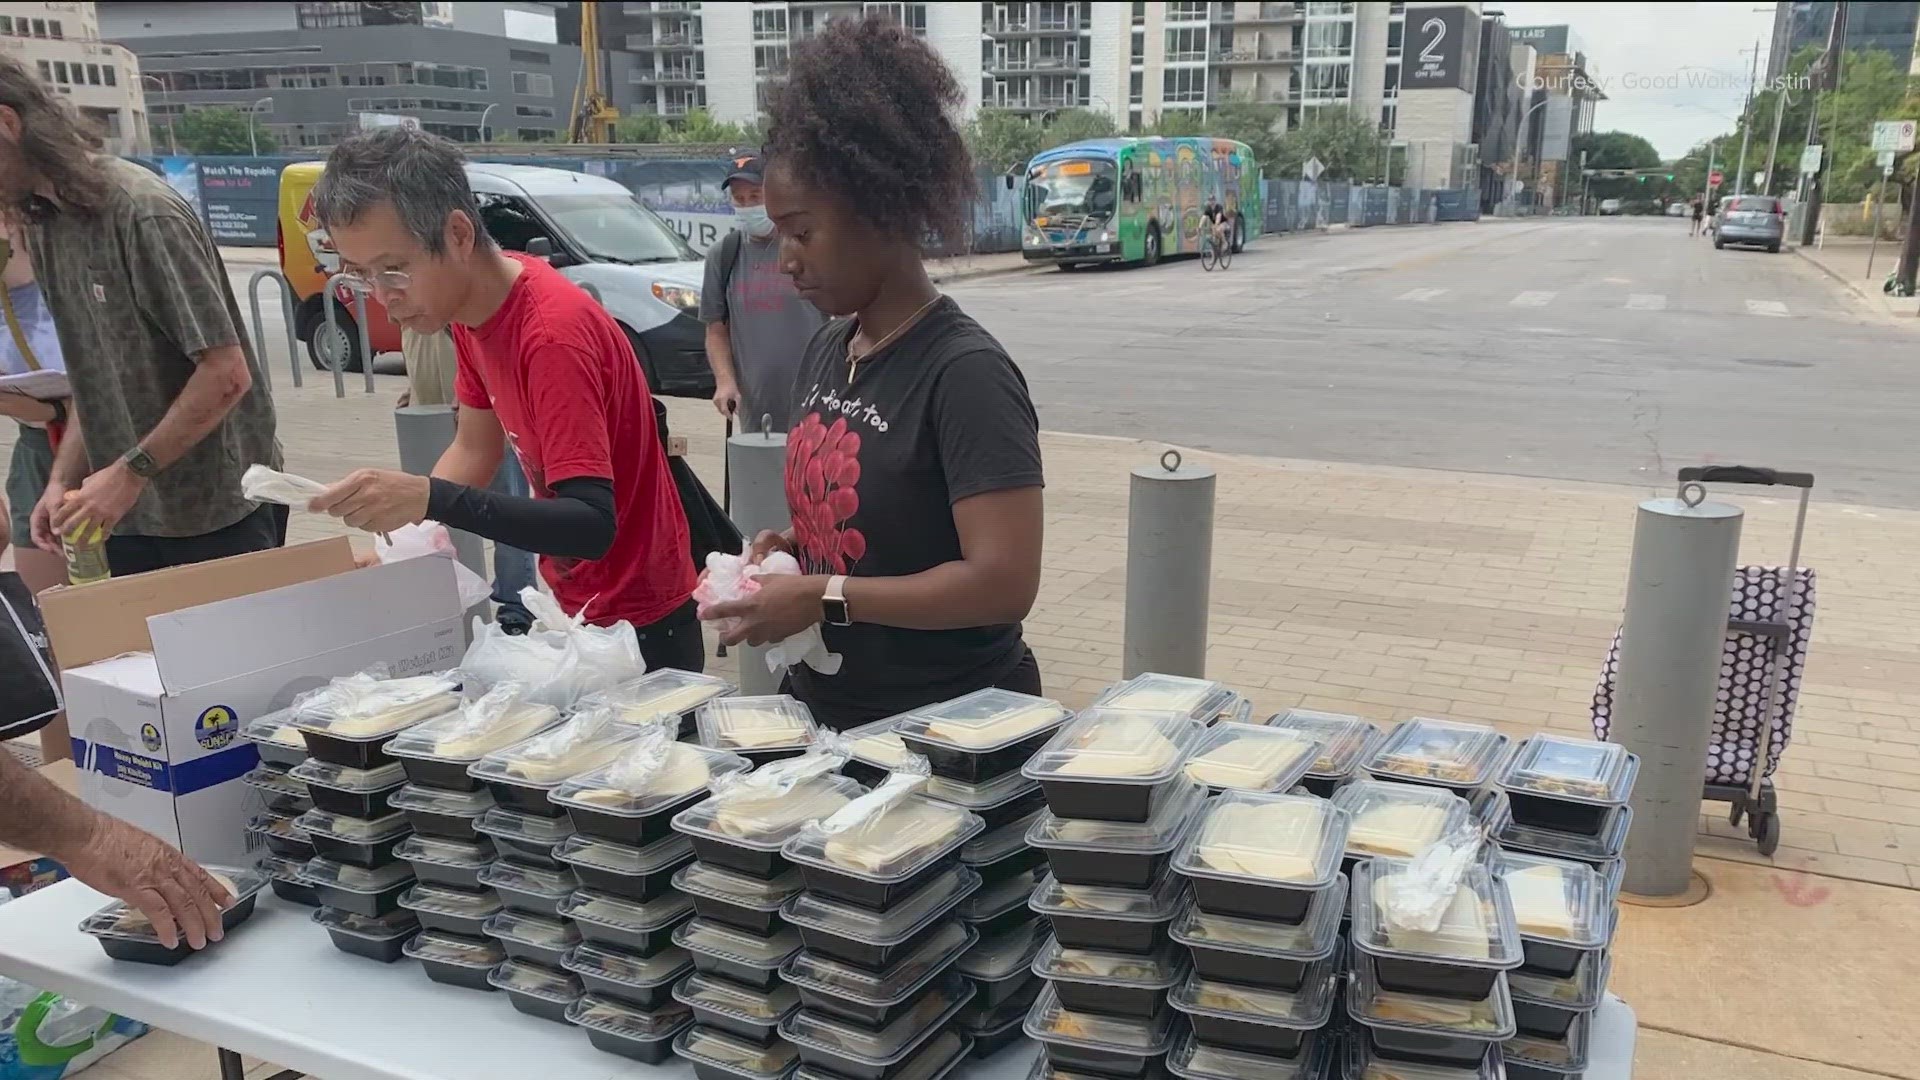 With the freezing weather, it's difficult for those without a home to get food. One local organization works with restaurants to make sure they get fed.